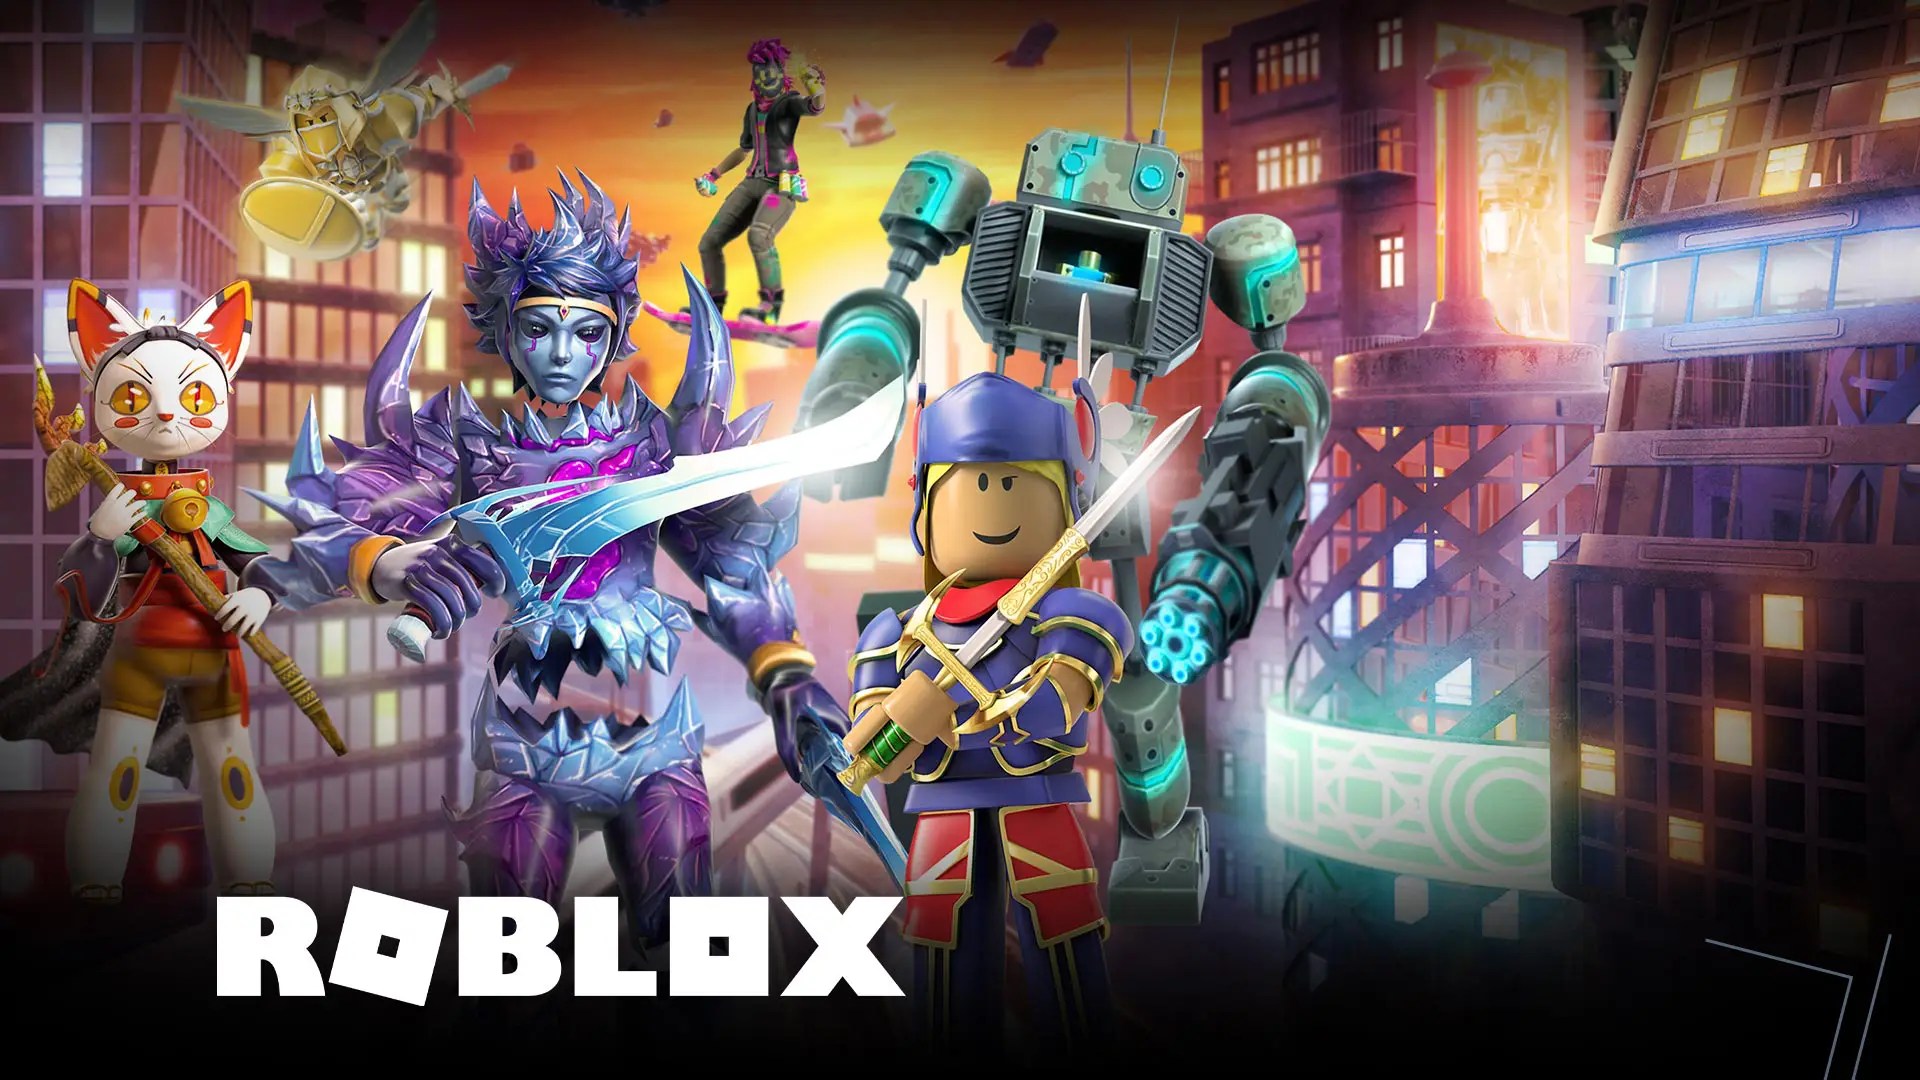 Roblox Is The Biggest Video Game None Of Us Are Talking About - escape the doctor roblox game